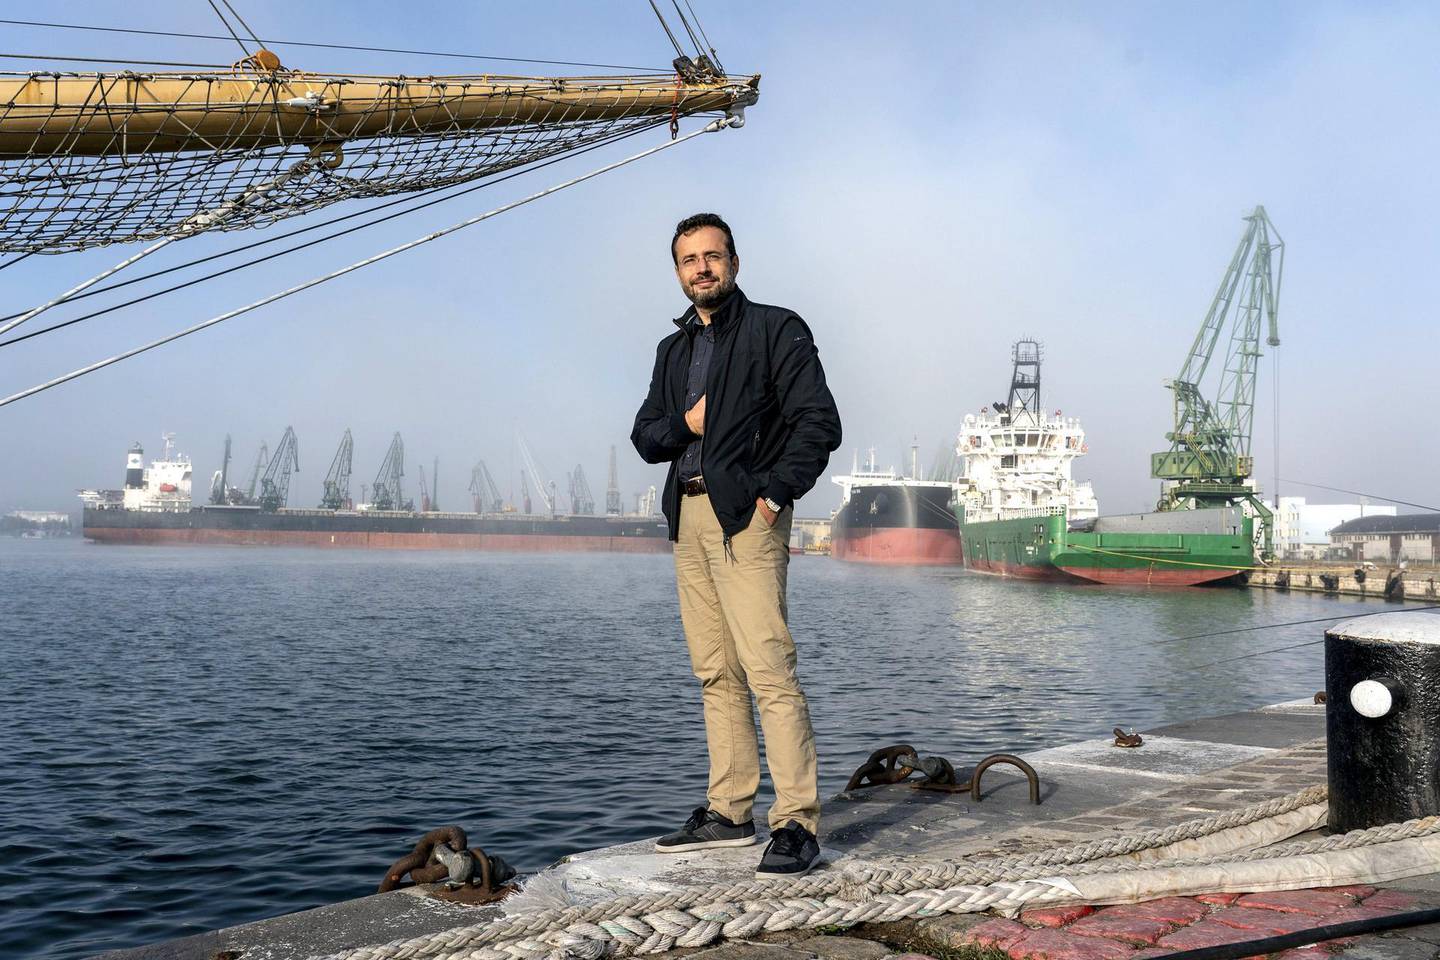 Petar Dimitrov, CEO and founder of Agricore brokerage posses for a picture in front of port of Varna in Varna city, Bulgaria on 10 October 2019.(Evgeniy Maloletka/Bloomberg)